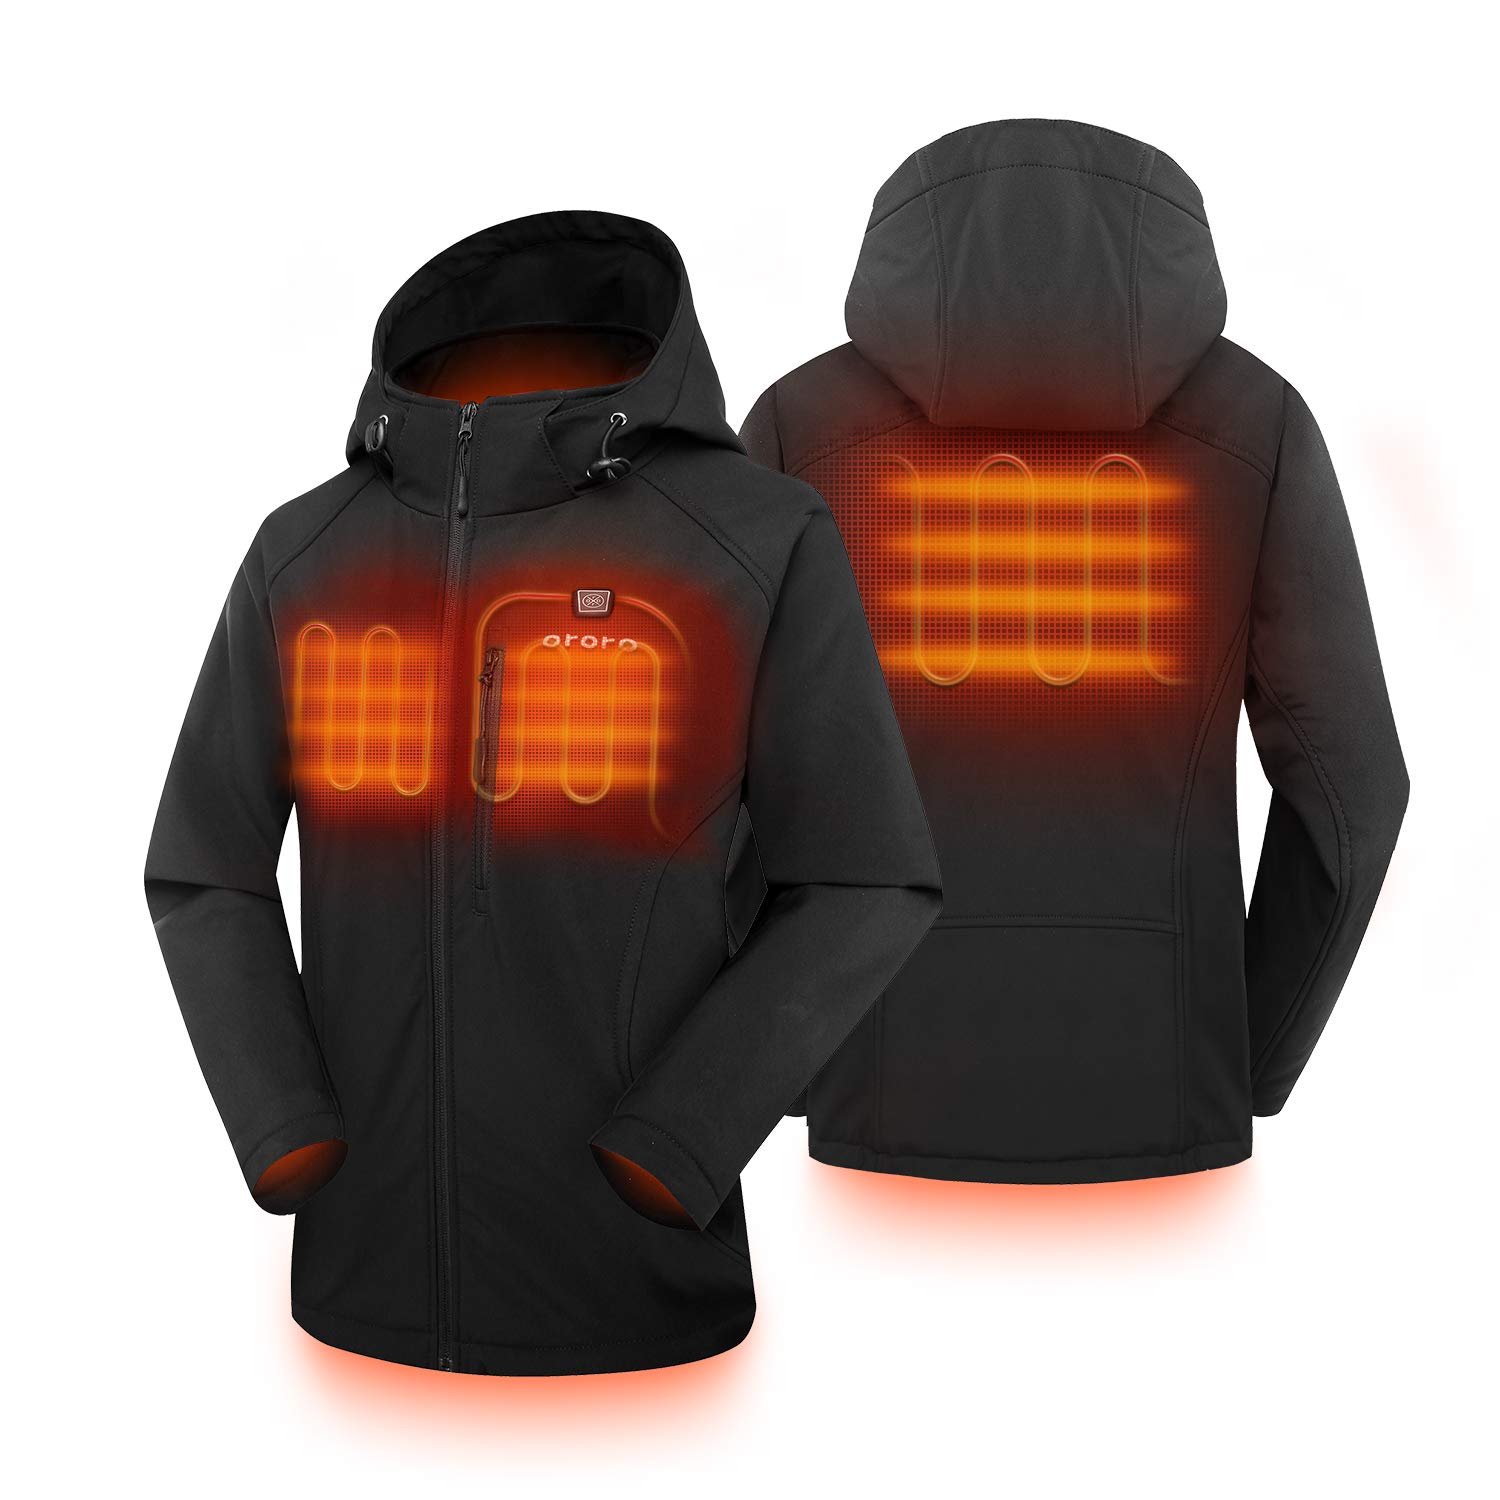 Woot Daily Deals: Stay Warm This Winter With Heated Jackets And Warm ...